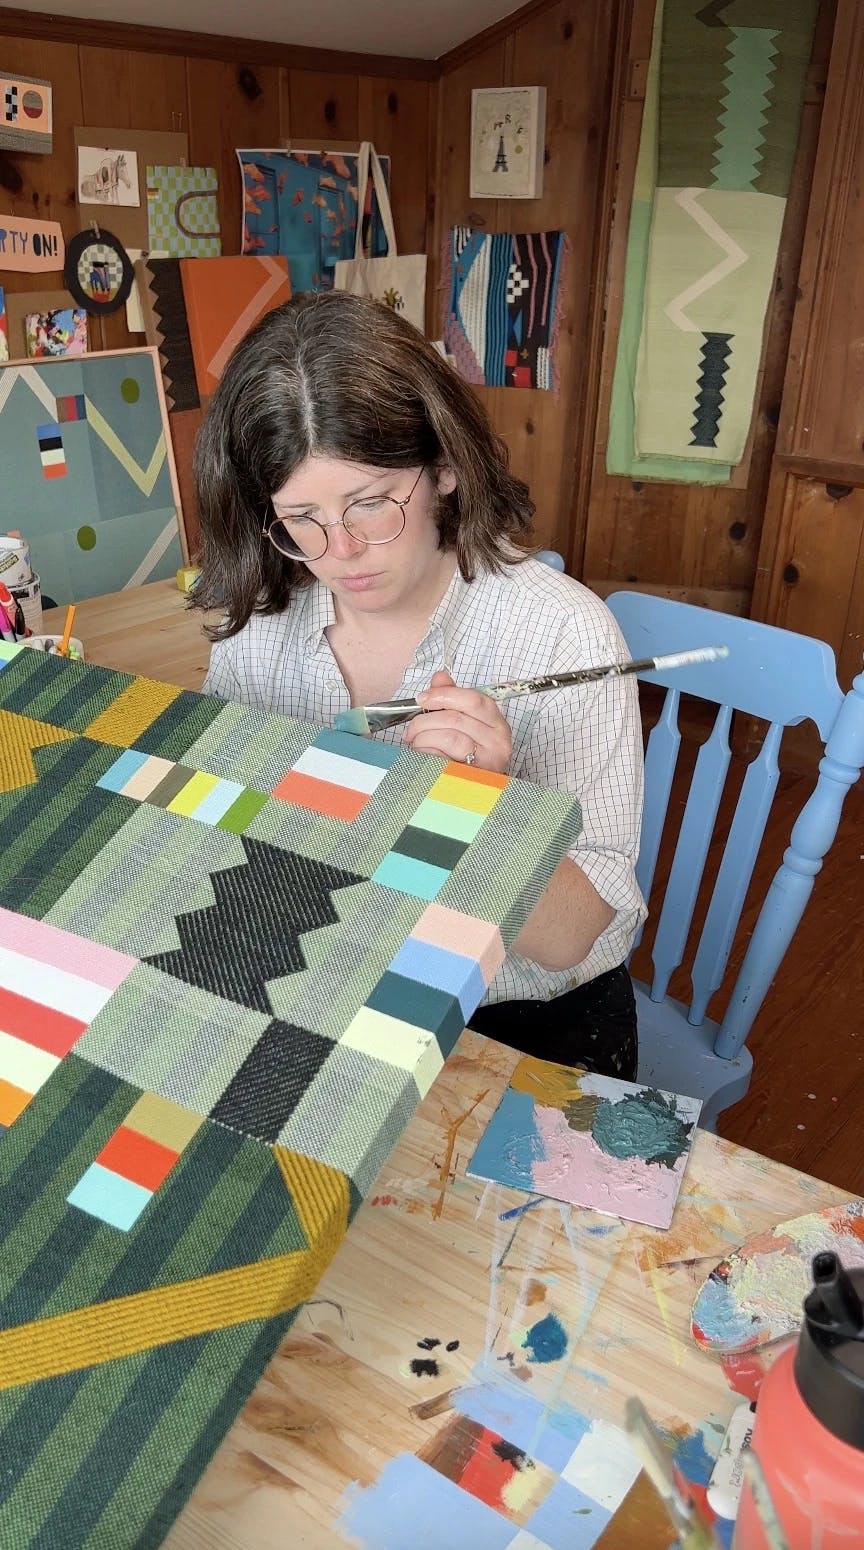 Artist Sarah Sullivan Sherrod sitting a light blue chair, working on a patchwork woven and painted piece in her studio.